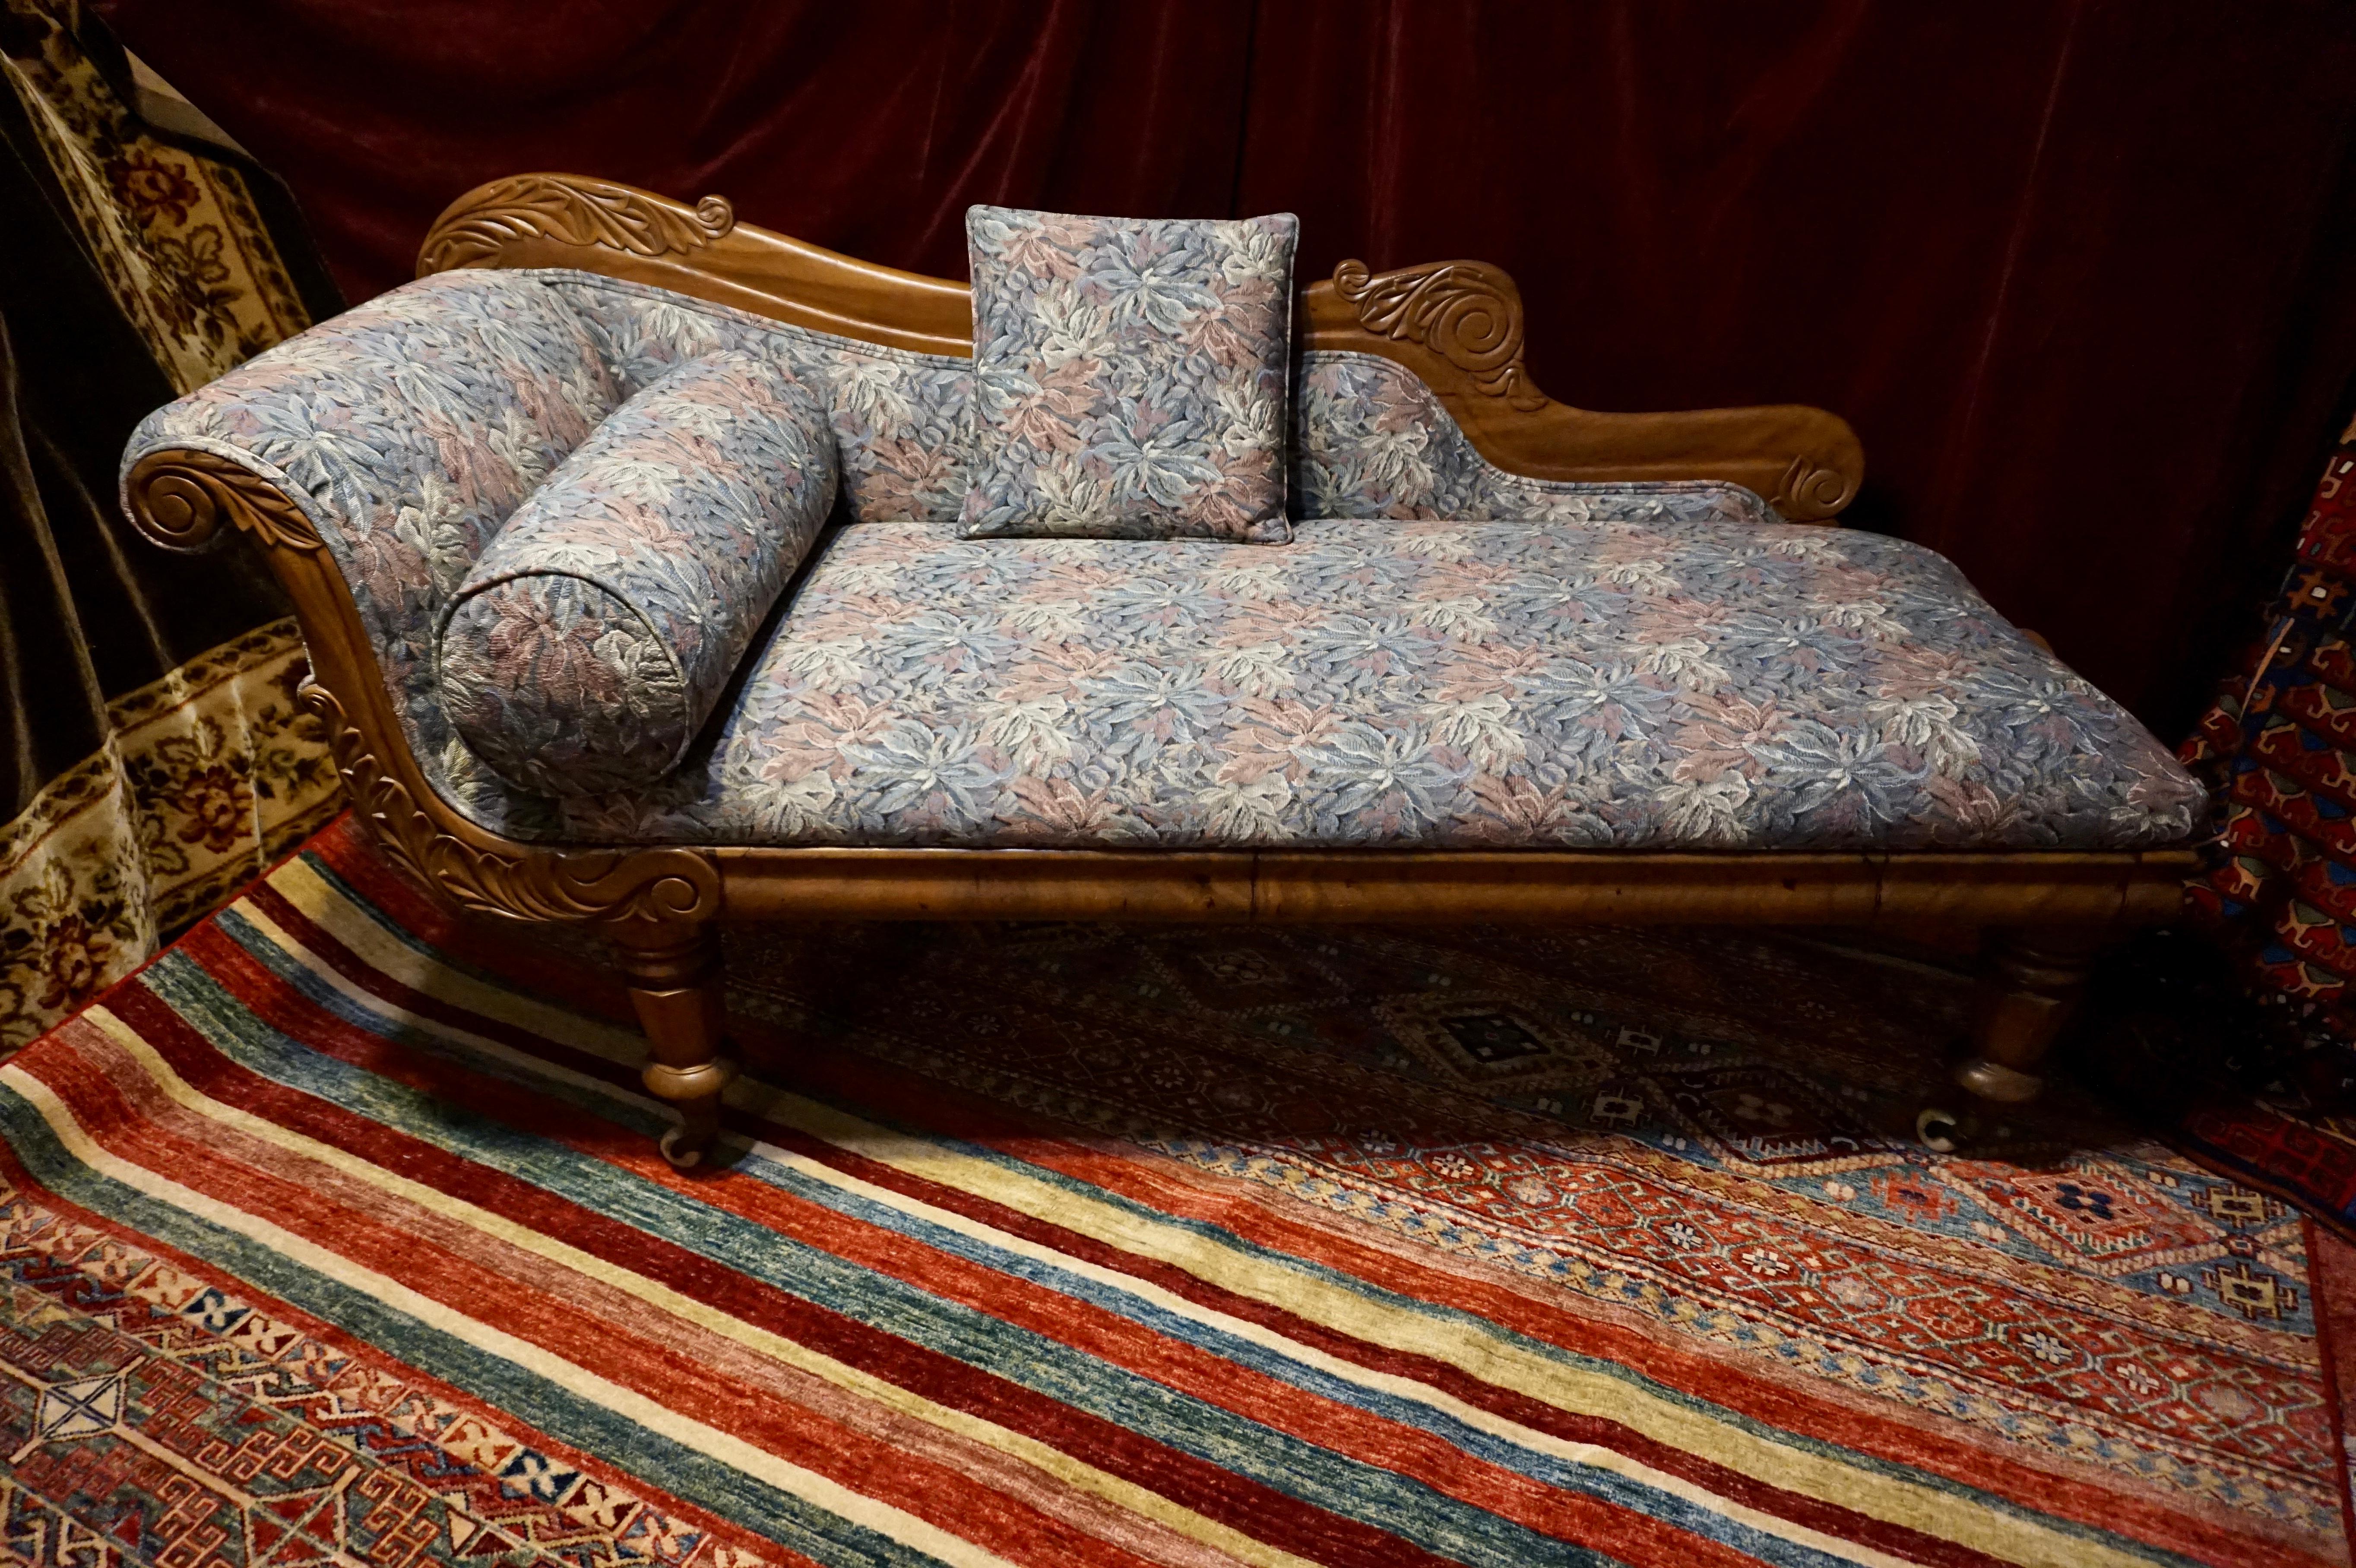 Well proportioned and elegant Victorian chaise lounge in beautiful floral upholstery front to back. Hand carved with finesse and sits on original porcelain casters for ease of movement. A great piece to place by a porch or sunlit bay window and